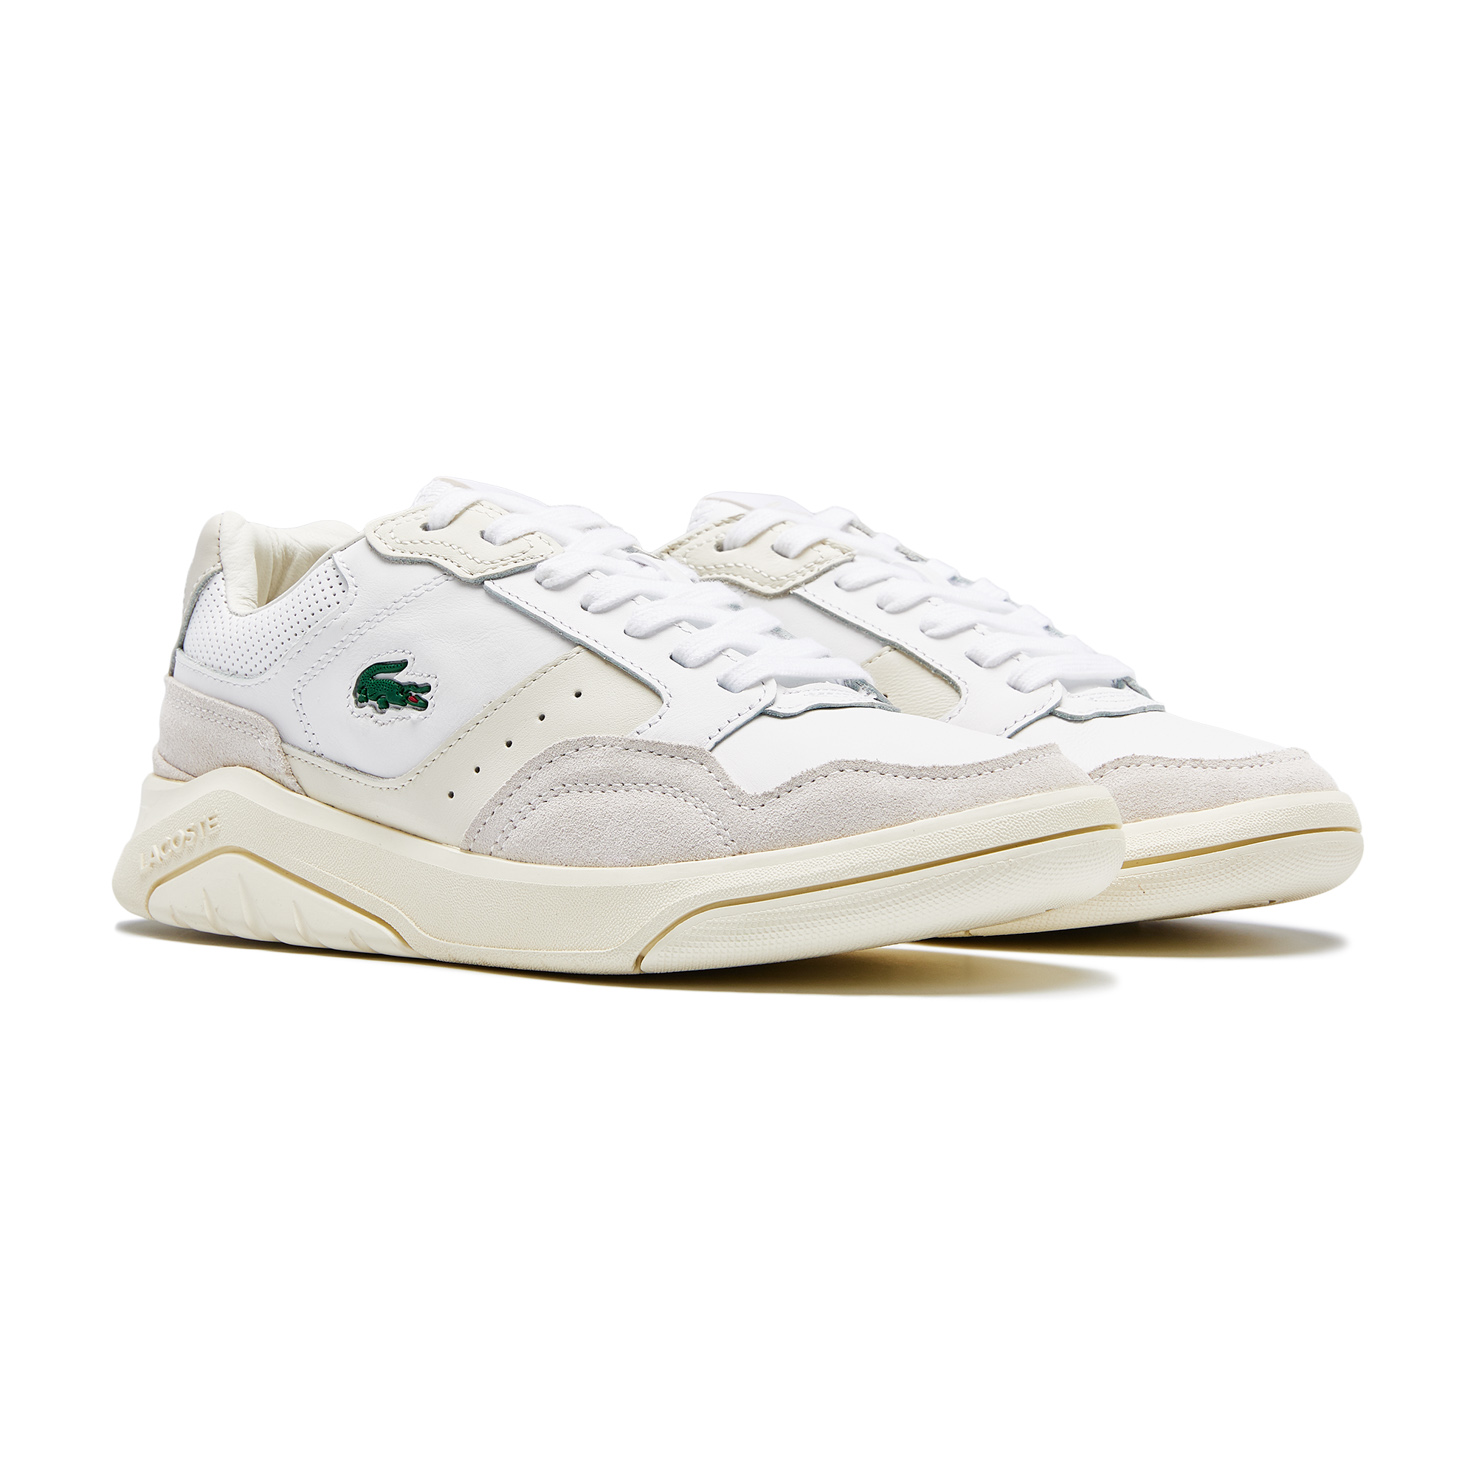 GAME ADVANCE LUXE LACOSTE, размер 36, цвет розовый 741SFA0065 - фото 2